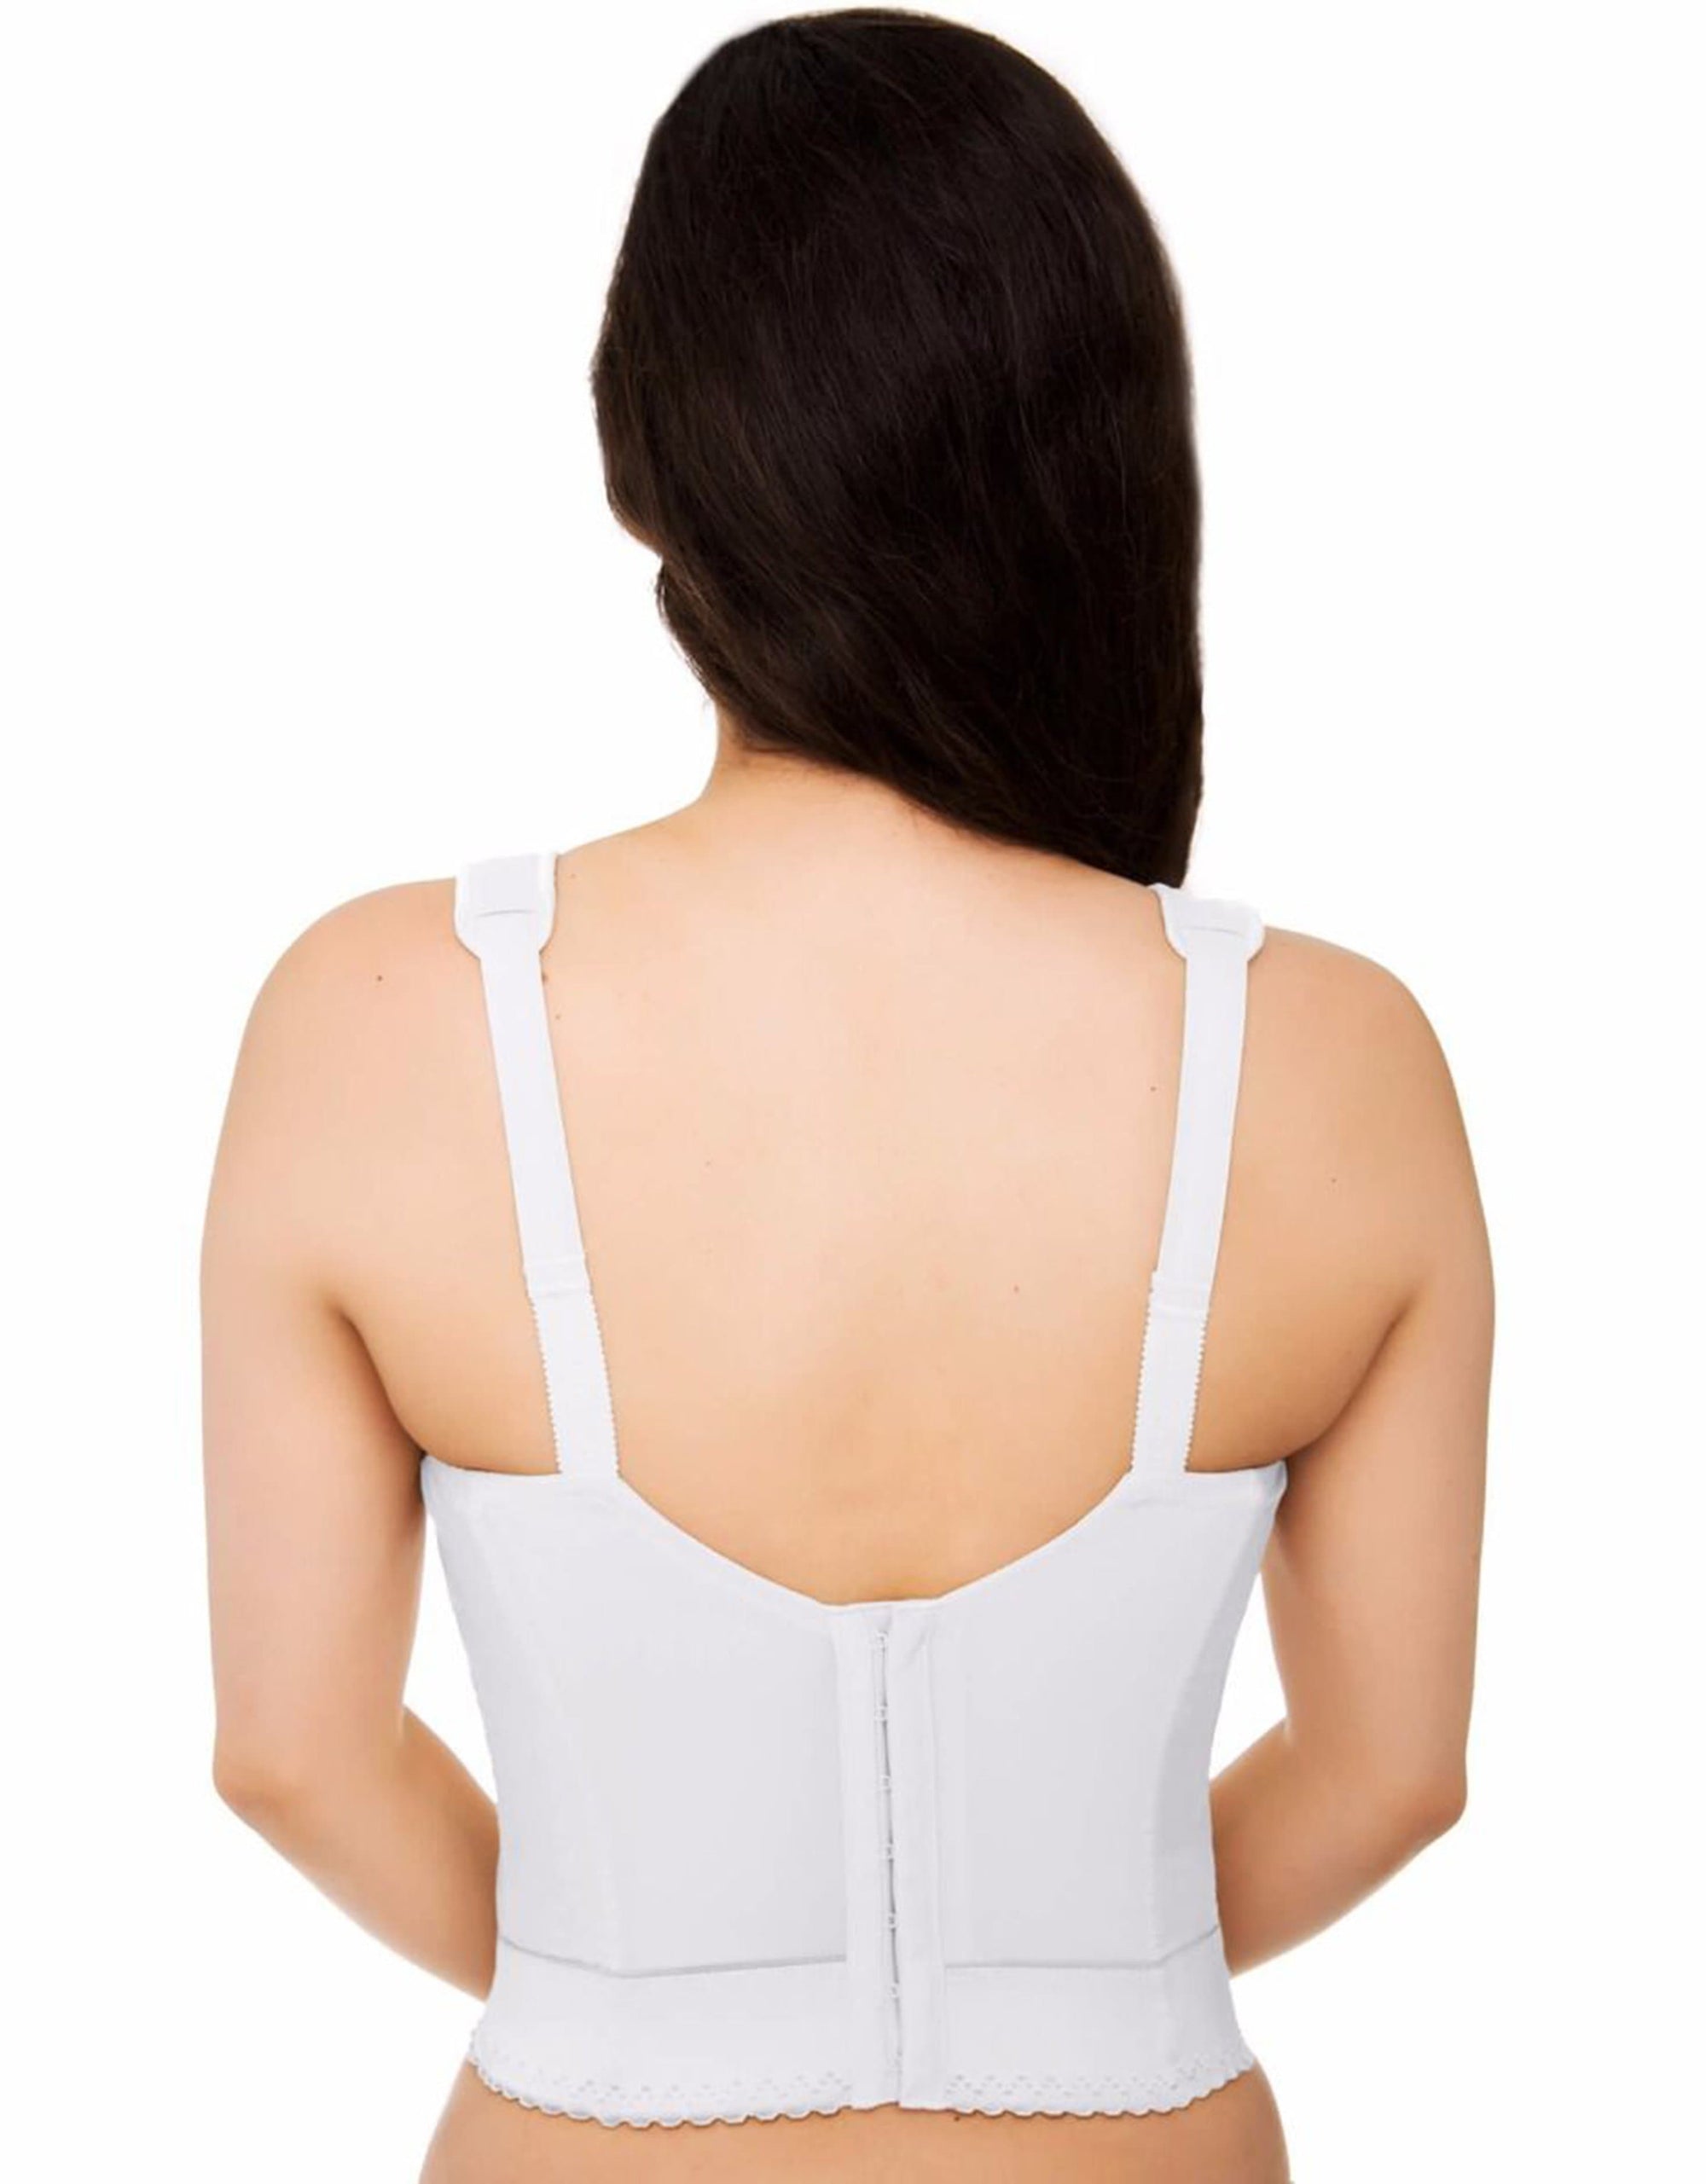 Forme Power Bra Review: Is the posture-correcting bra worth it